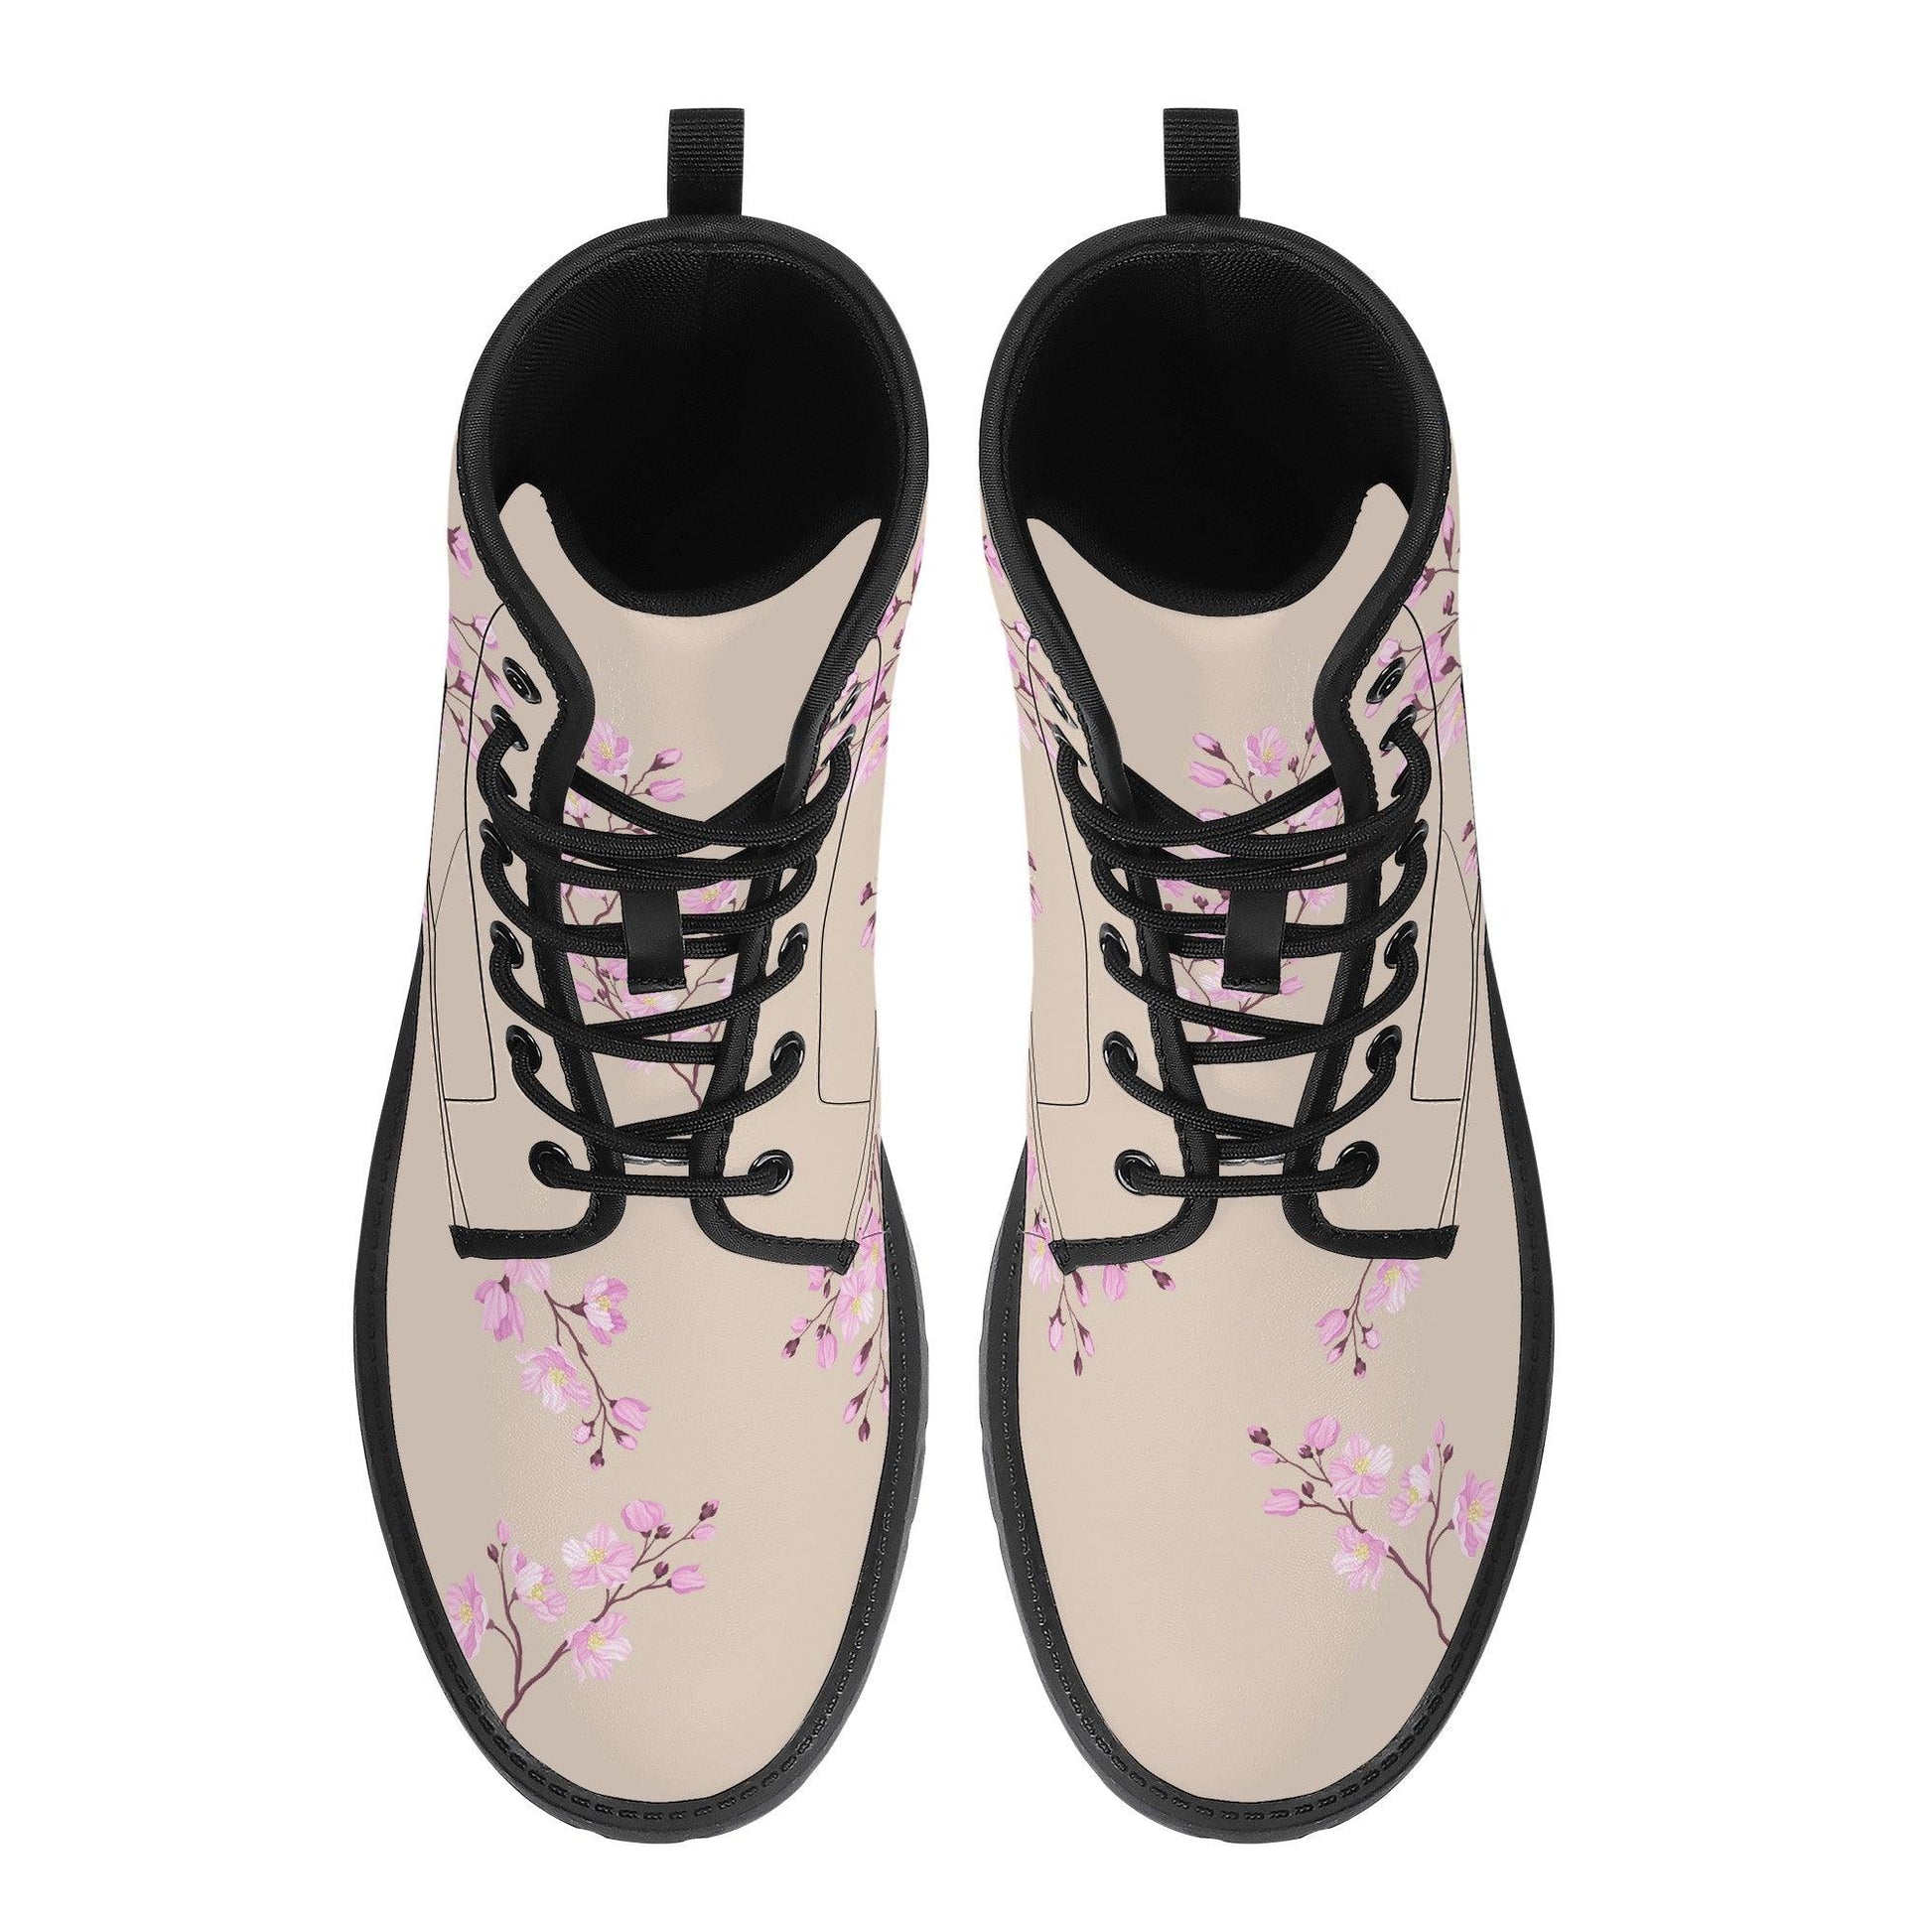 Cream Vegan Leather Boots with Cherry Blossom